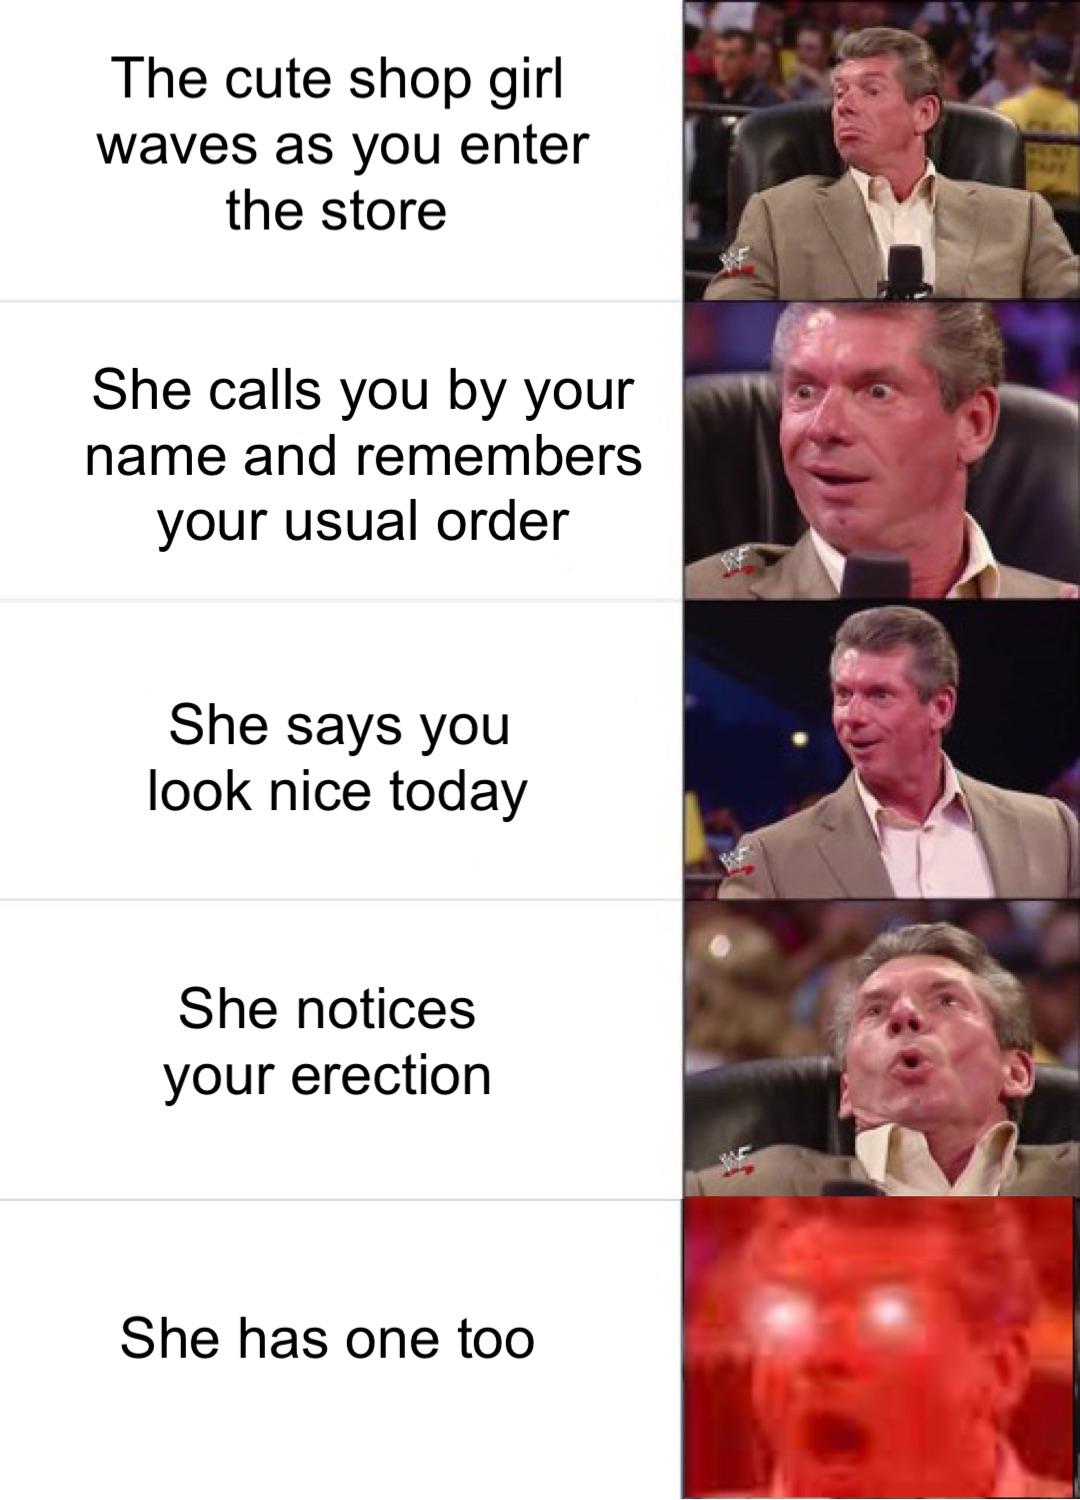 vince mcmahon meme template - The cute shop girl waves as you enter the store She calls you by your name and remembers your usual order She says you look nice today She notices your erection She has one too